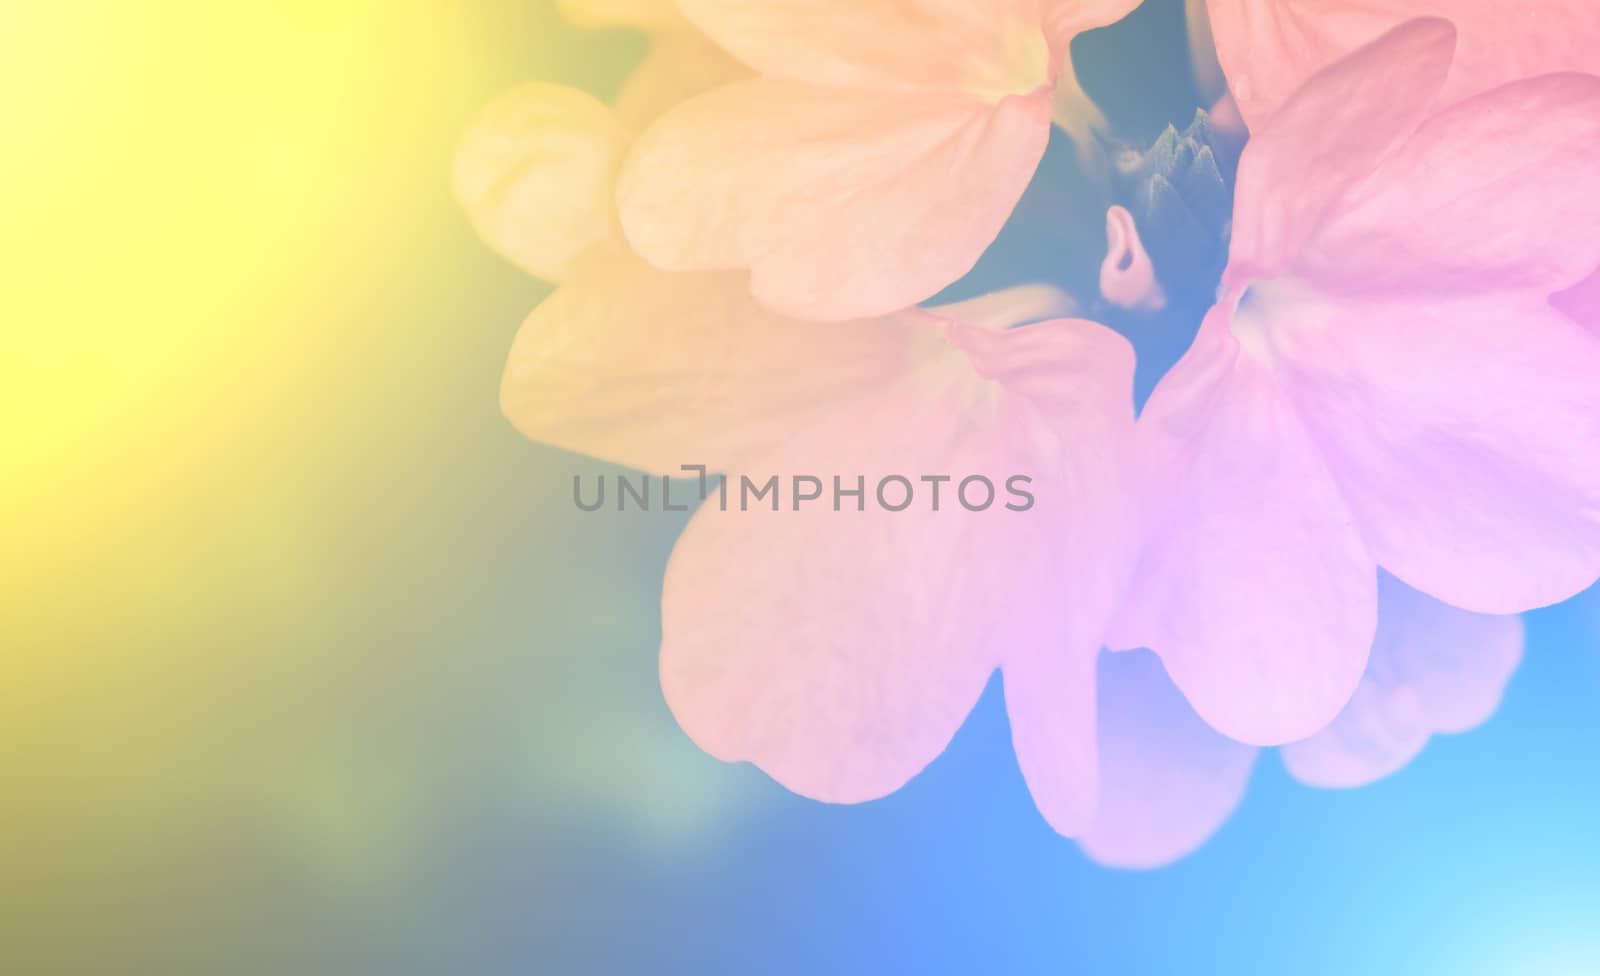 vivid colors beautiful floral in soft style.For art texture or web design and floral background.